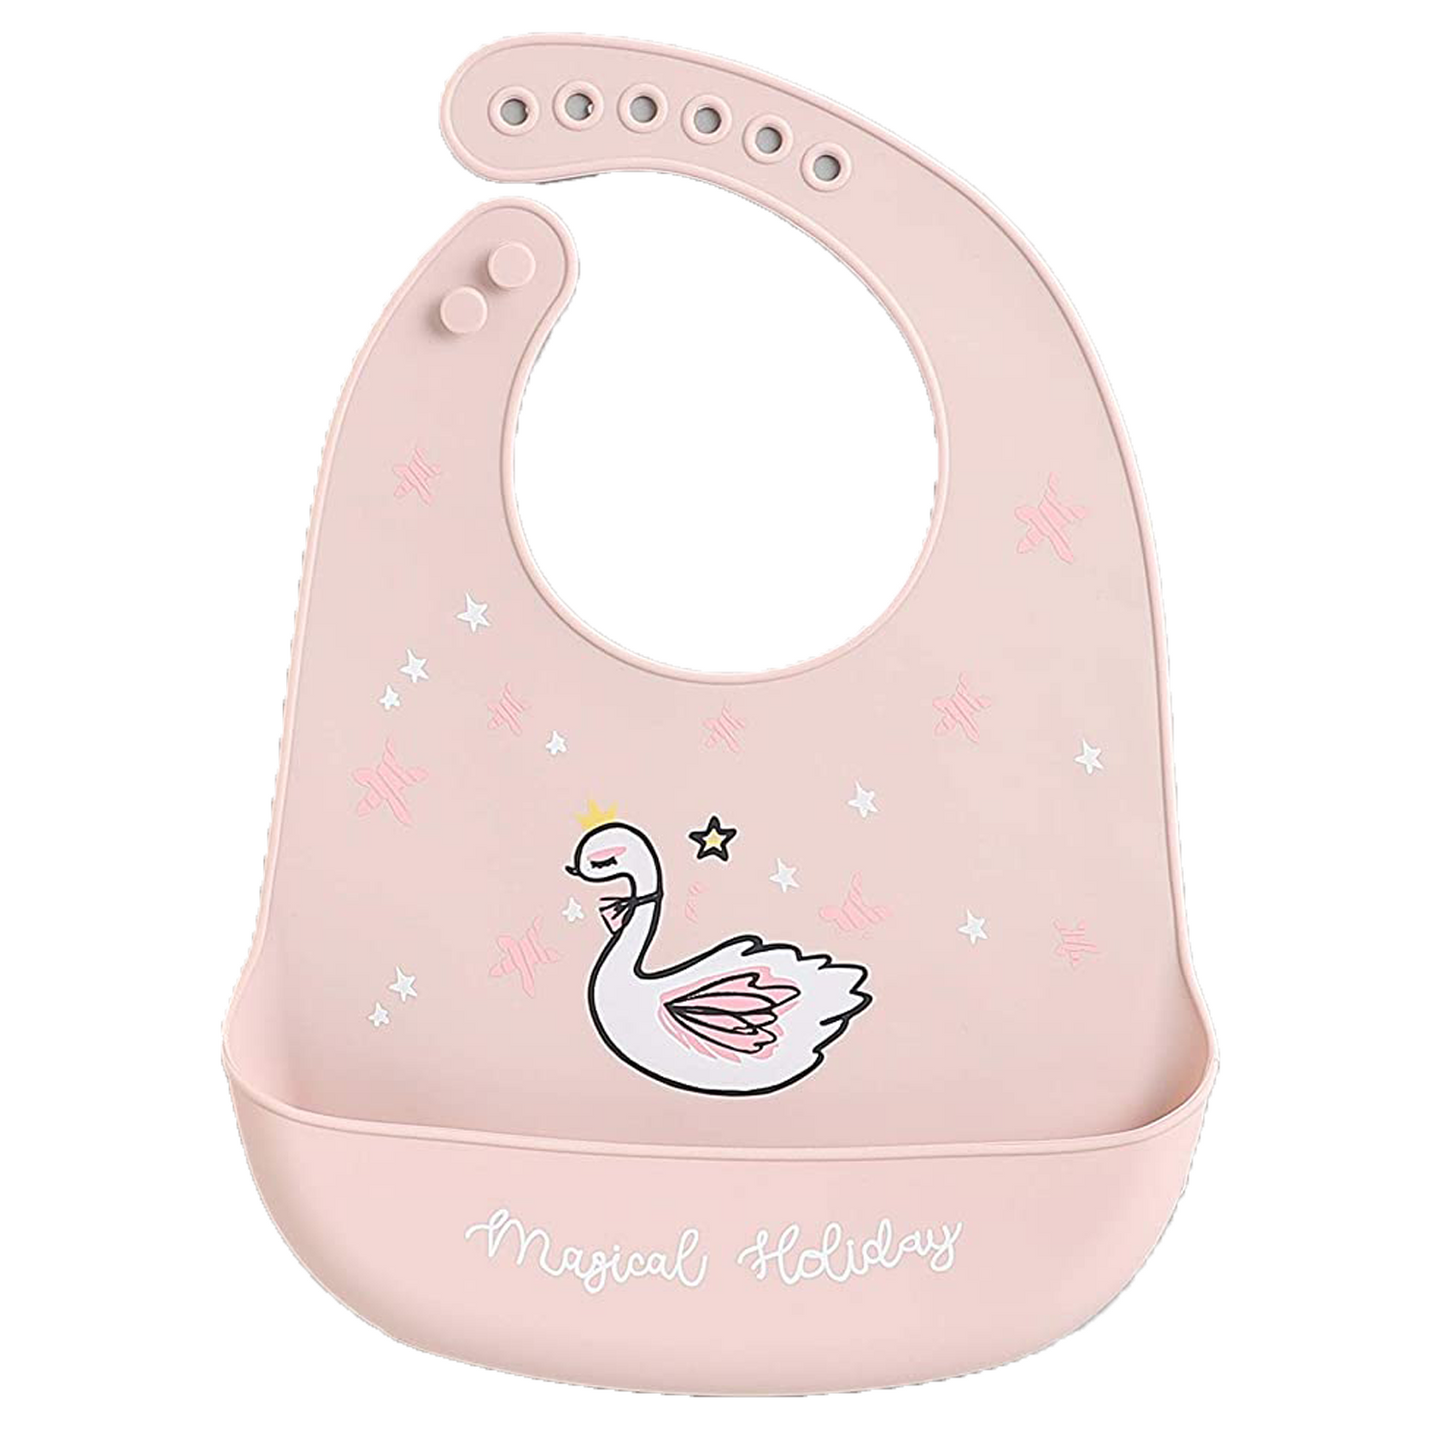 Polka Tots Waterproof Silicone Bibs with Pocket and Adjustable Snaps (Swans Design)